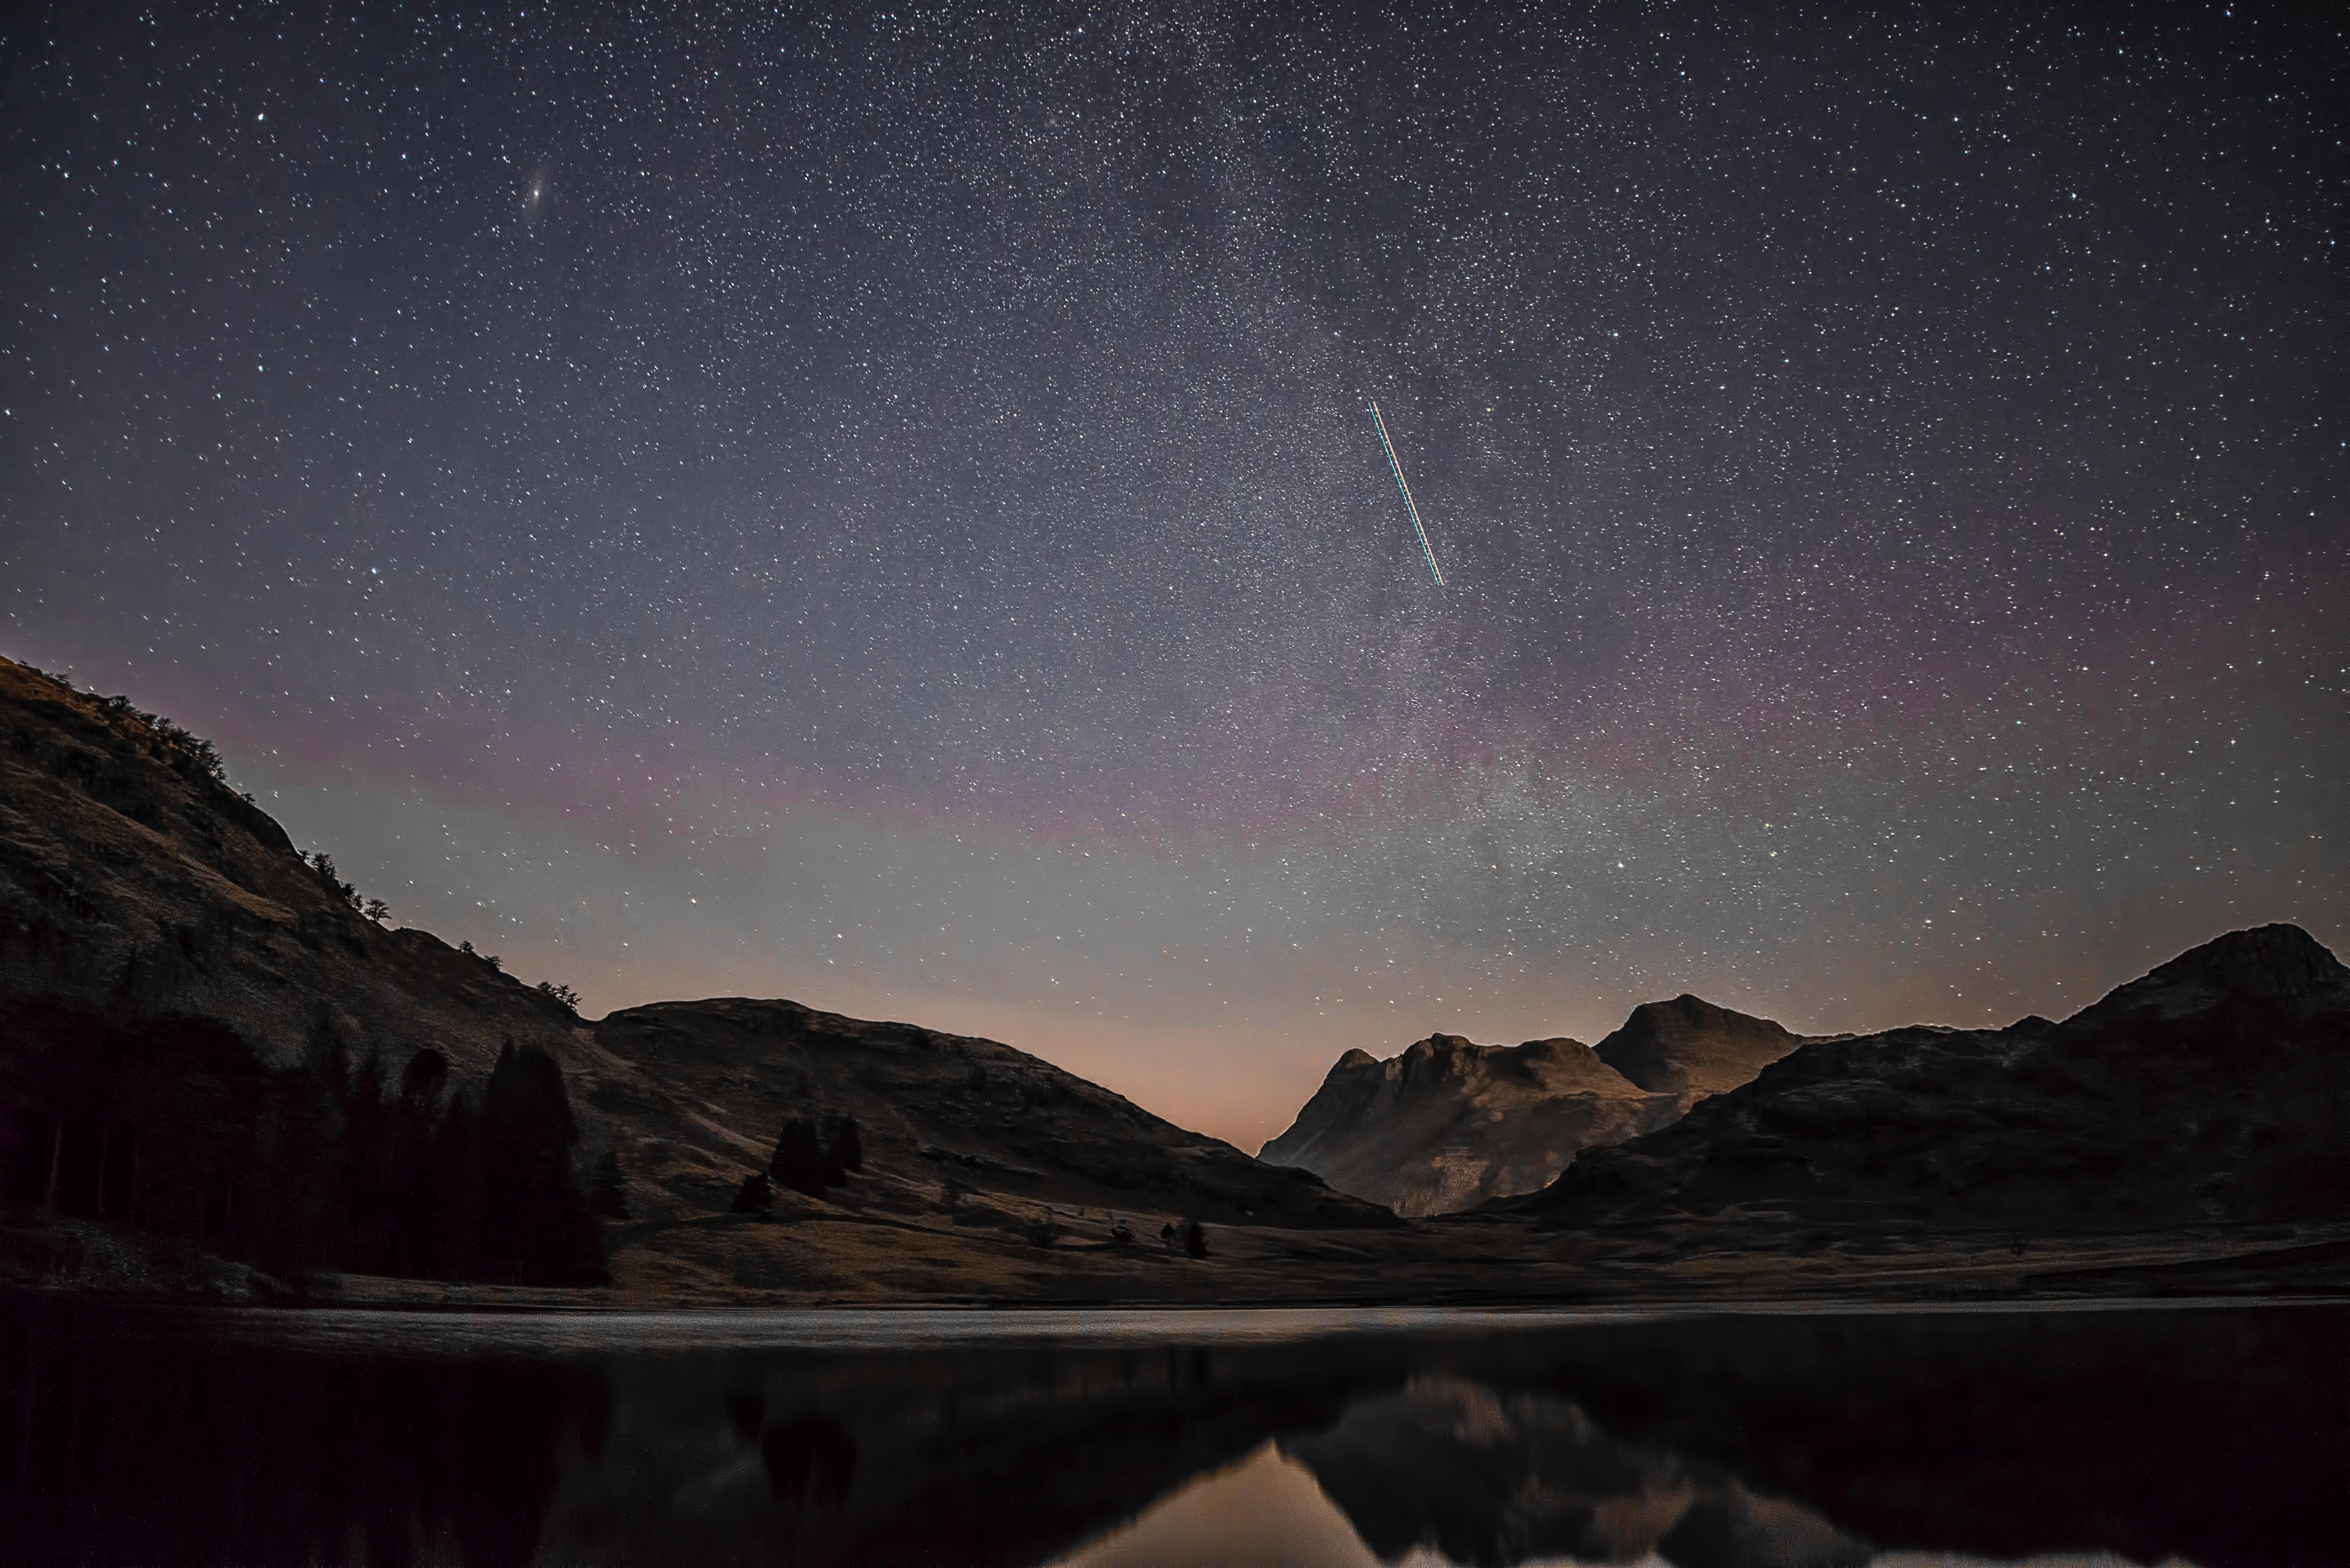 #mountains, #reflection, #shooting star, #nature, #hd, k